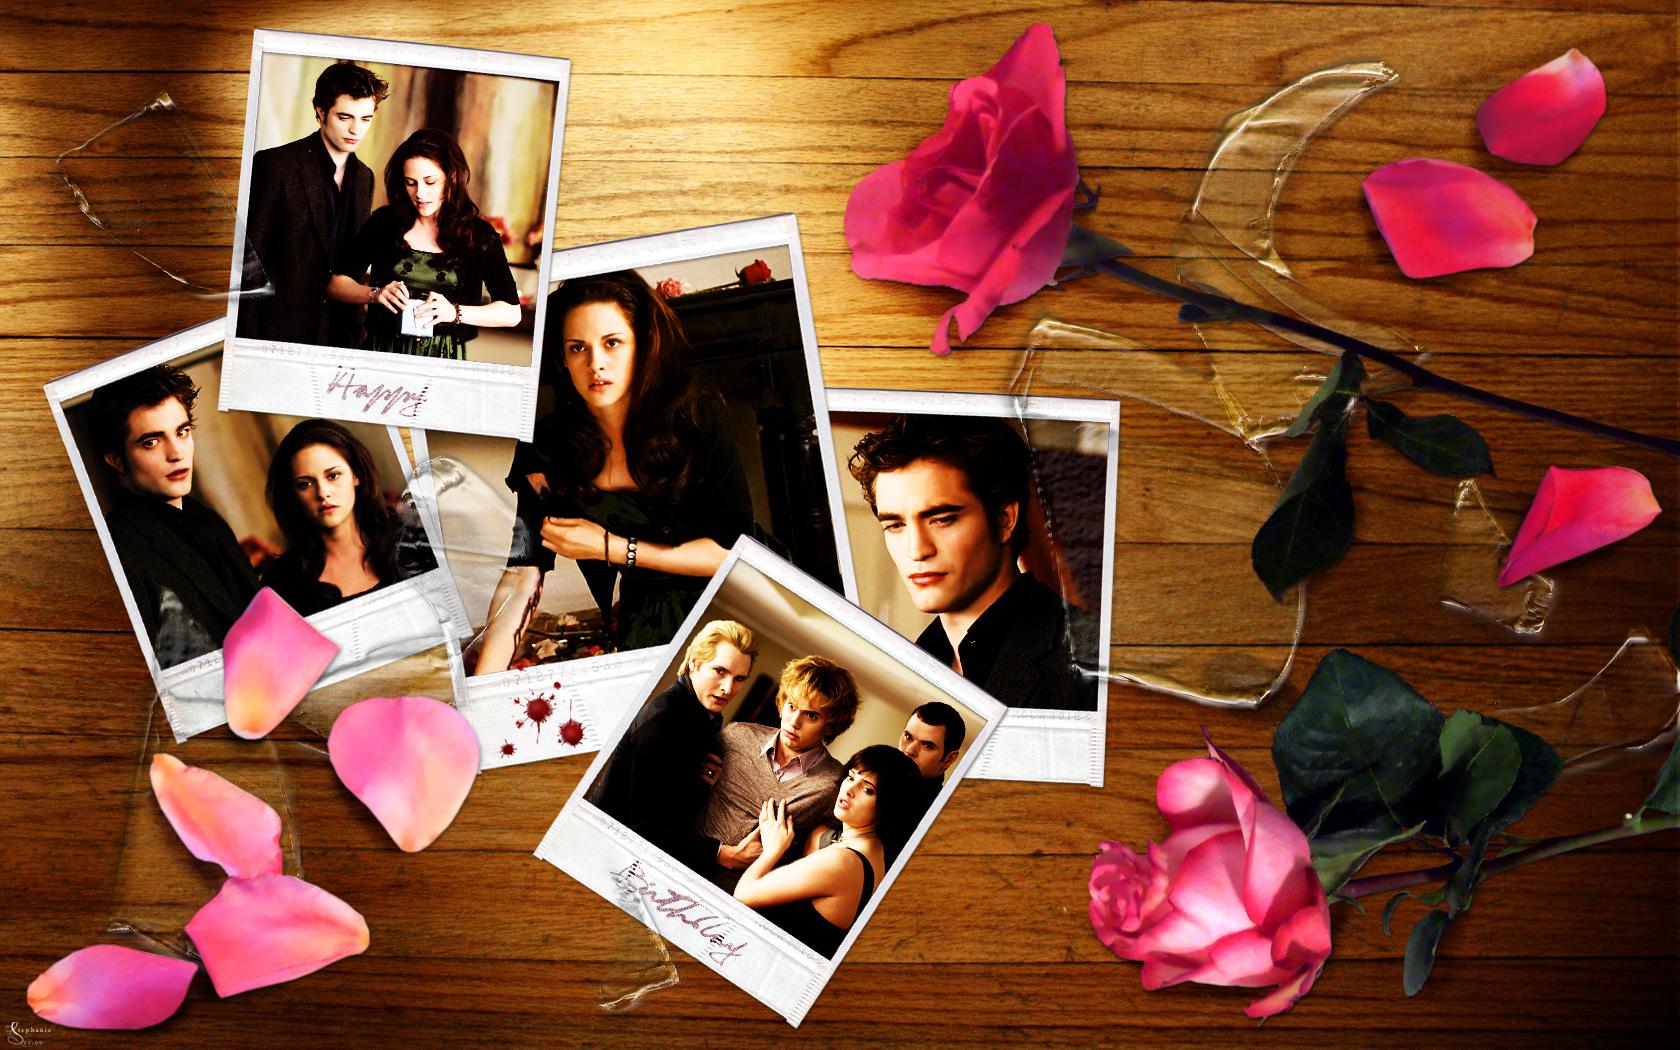 New Moon The Twilight Saga wallpaper images pictures download